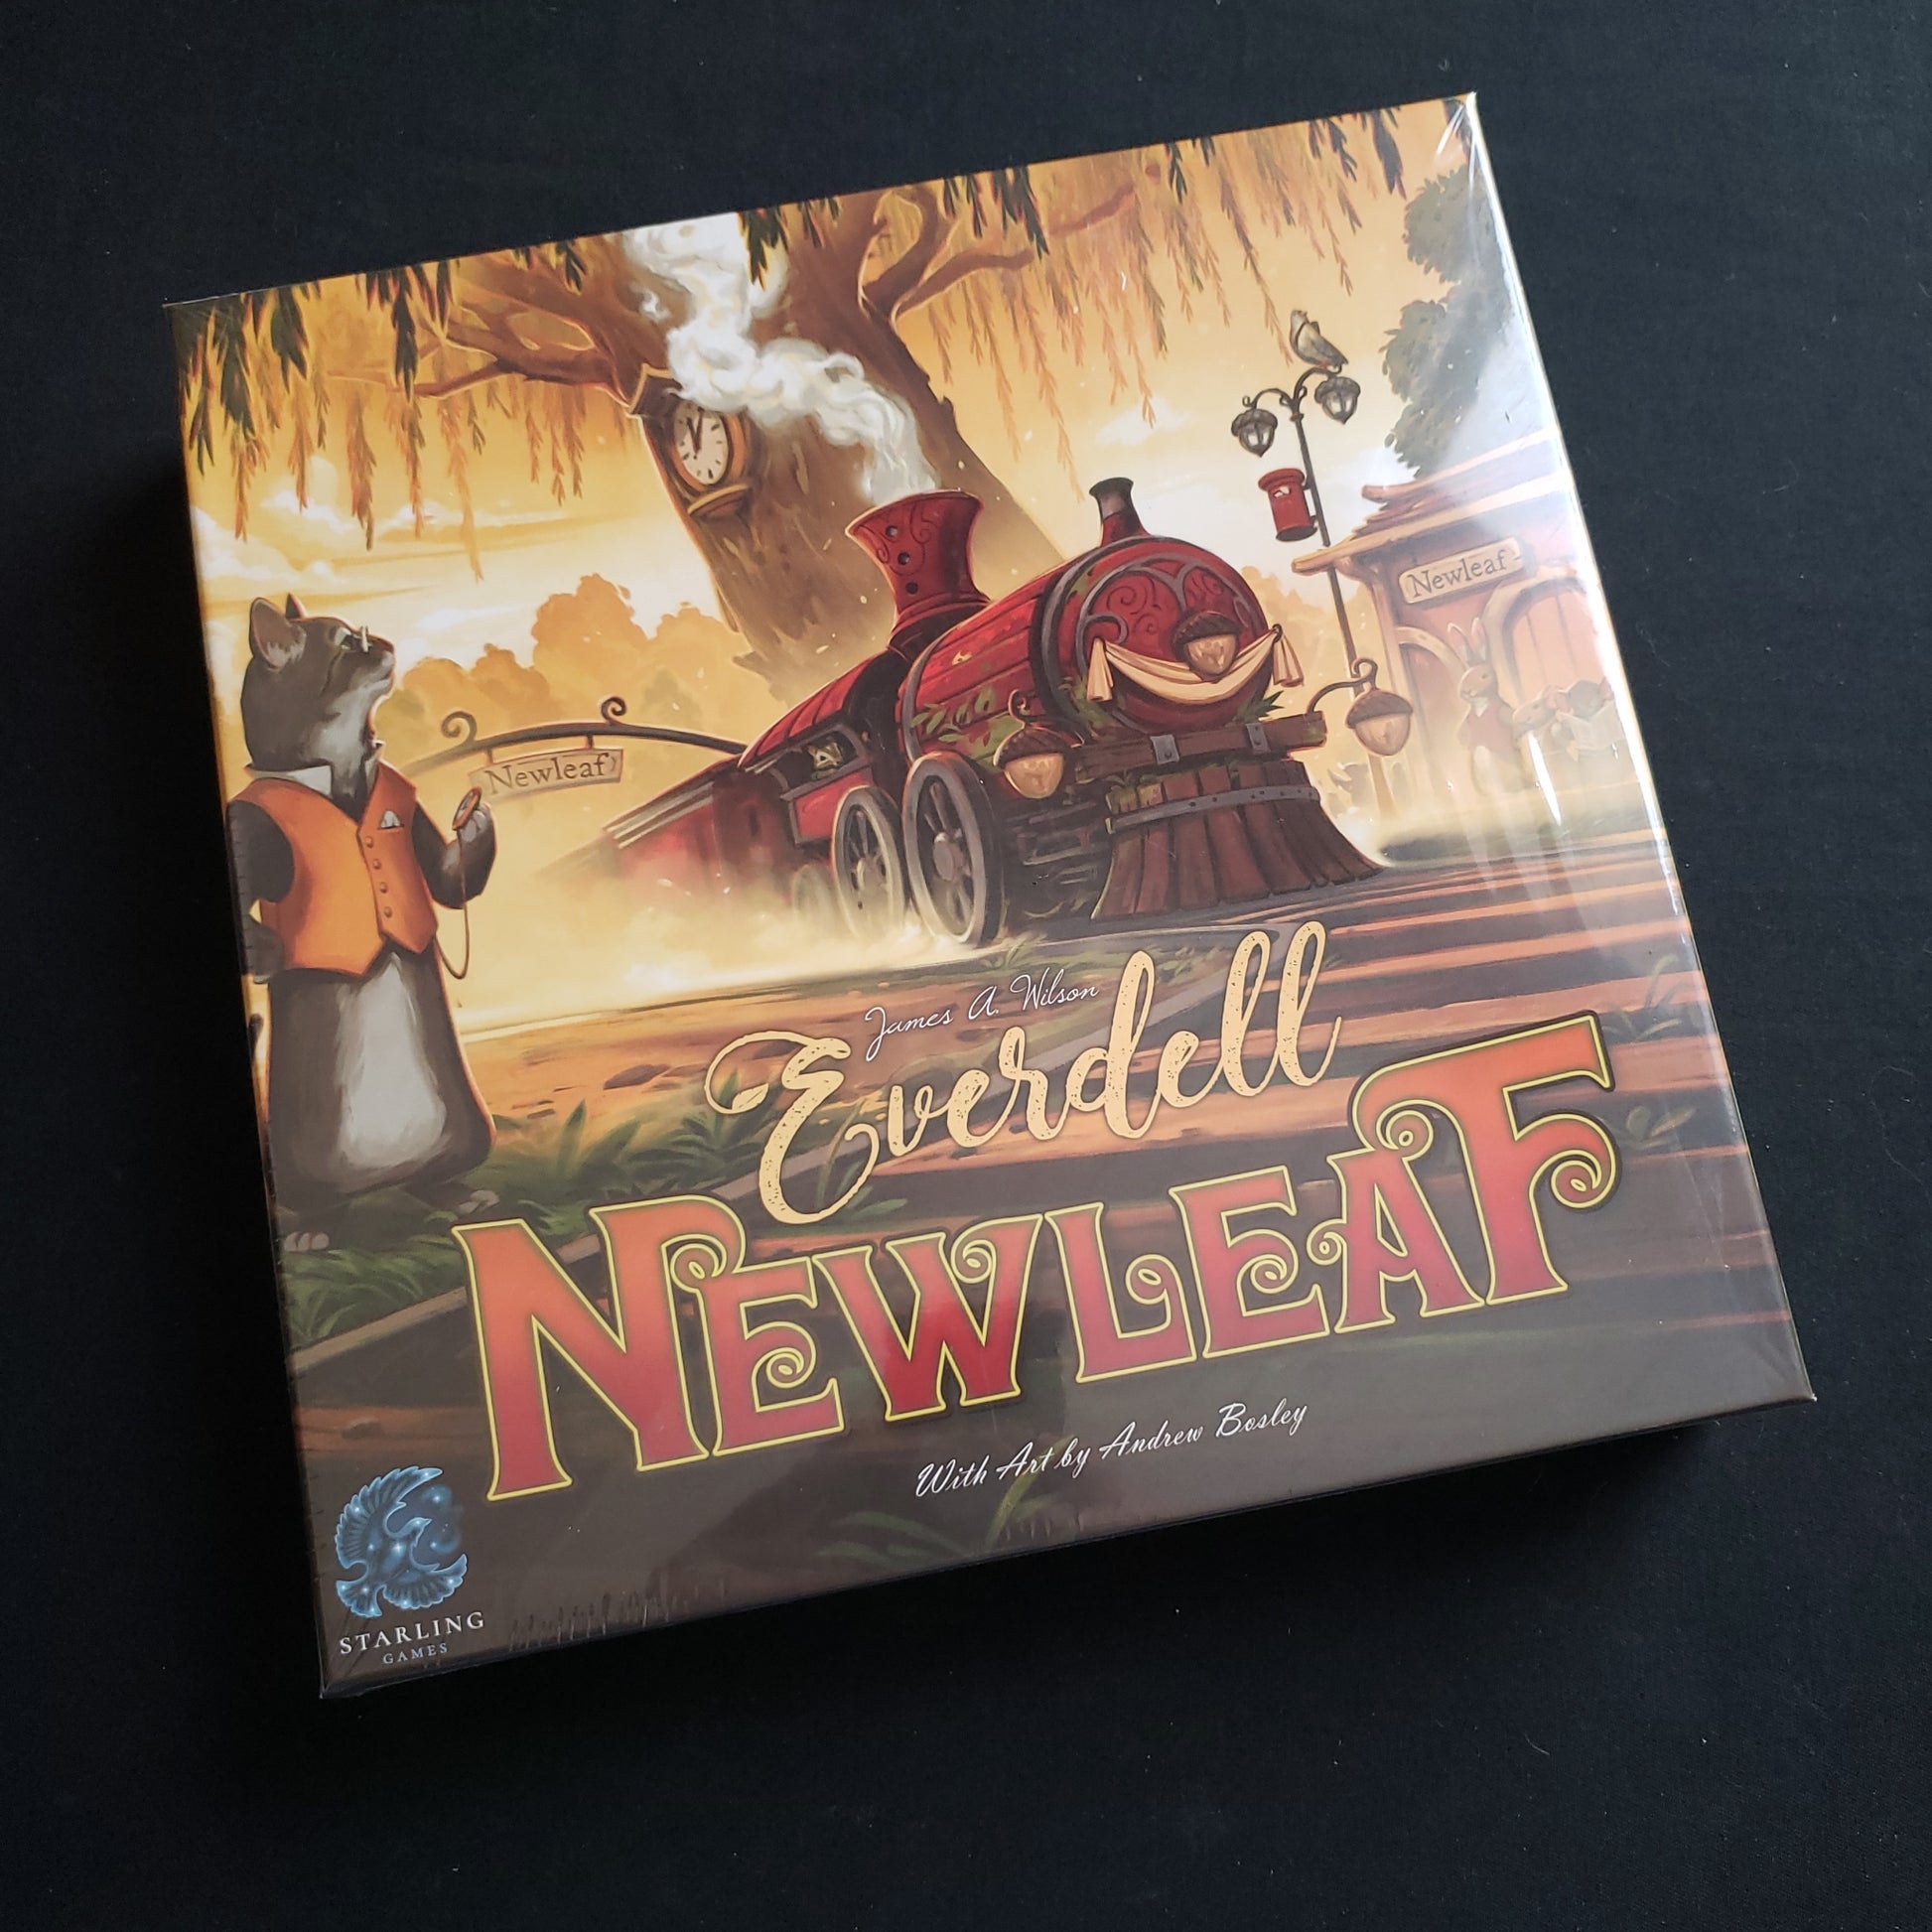 Image shows the front of the box for the Newleaf Expansion for the Everdell board game